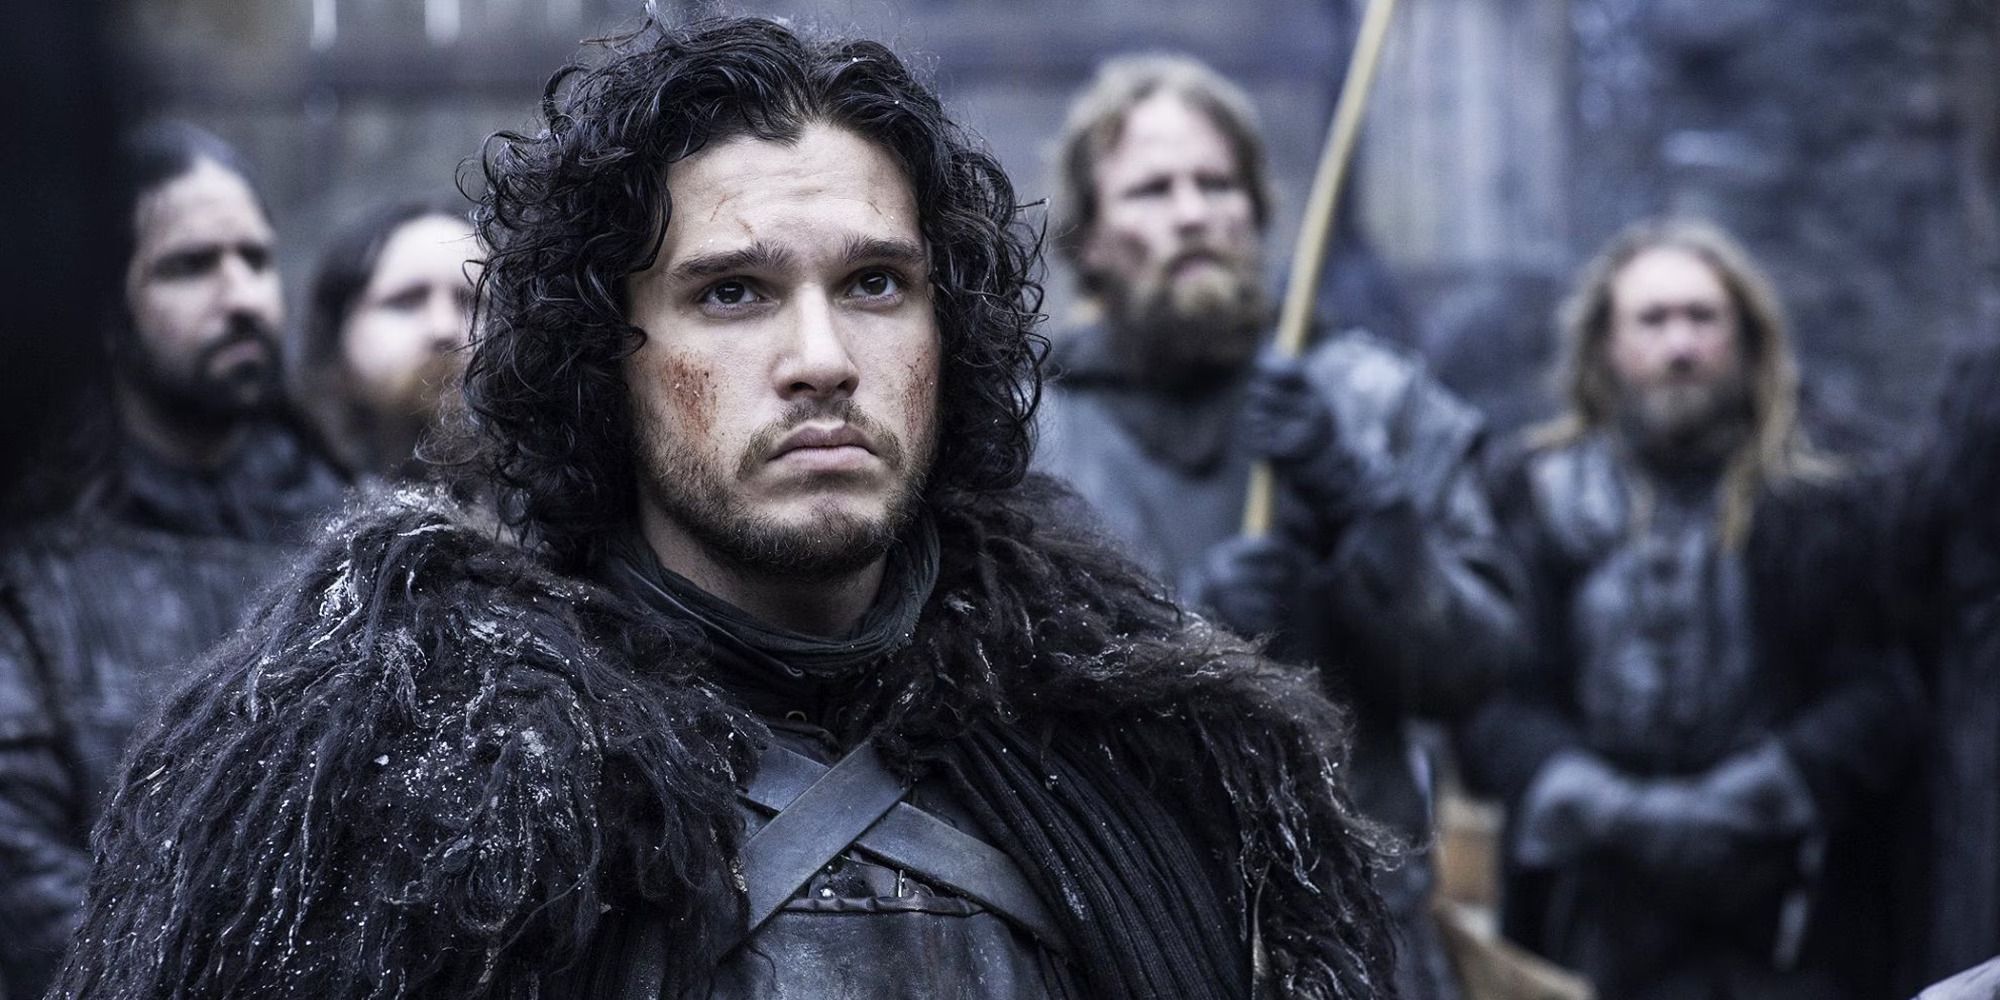 The Night’s Watch Vows, Explained